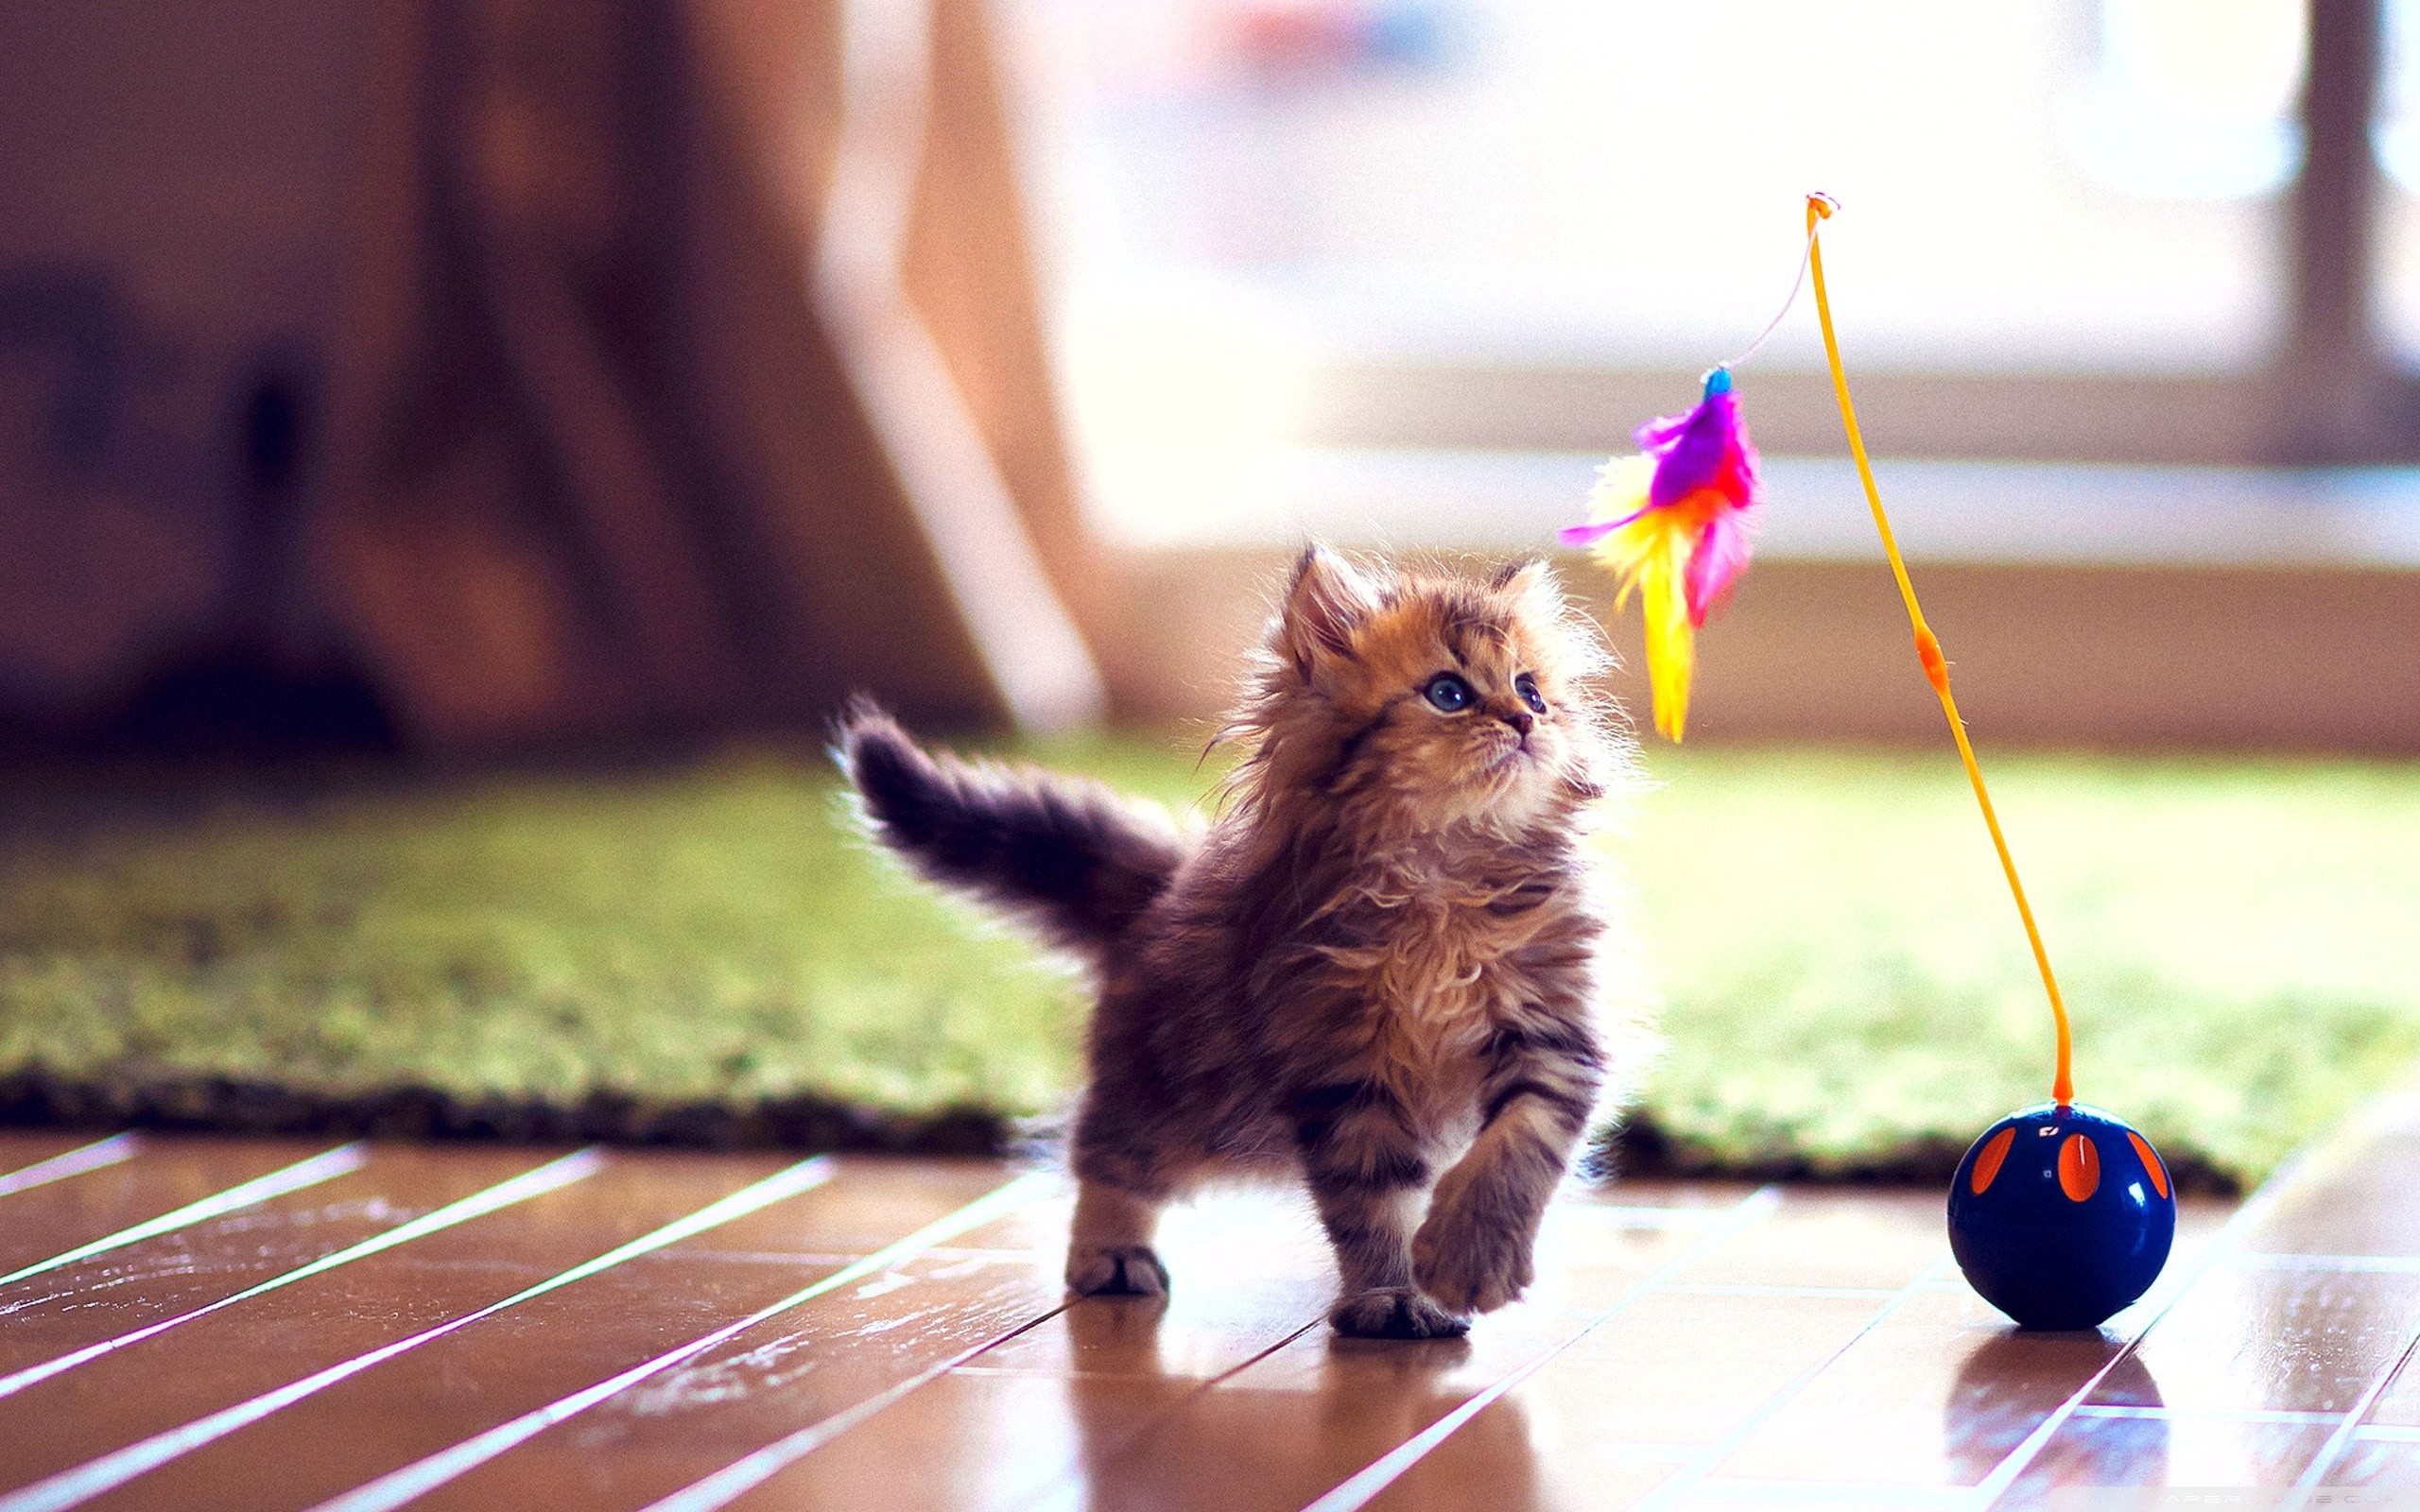 Very Cute Kitten Wallpaper Funny Cat Dog Pictures | HD Wallpapers |  Pinterest | Wallpaper and Wallpapers android